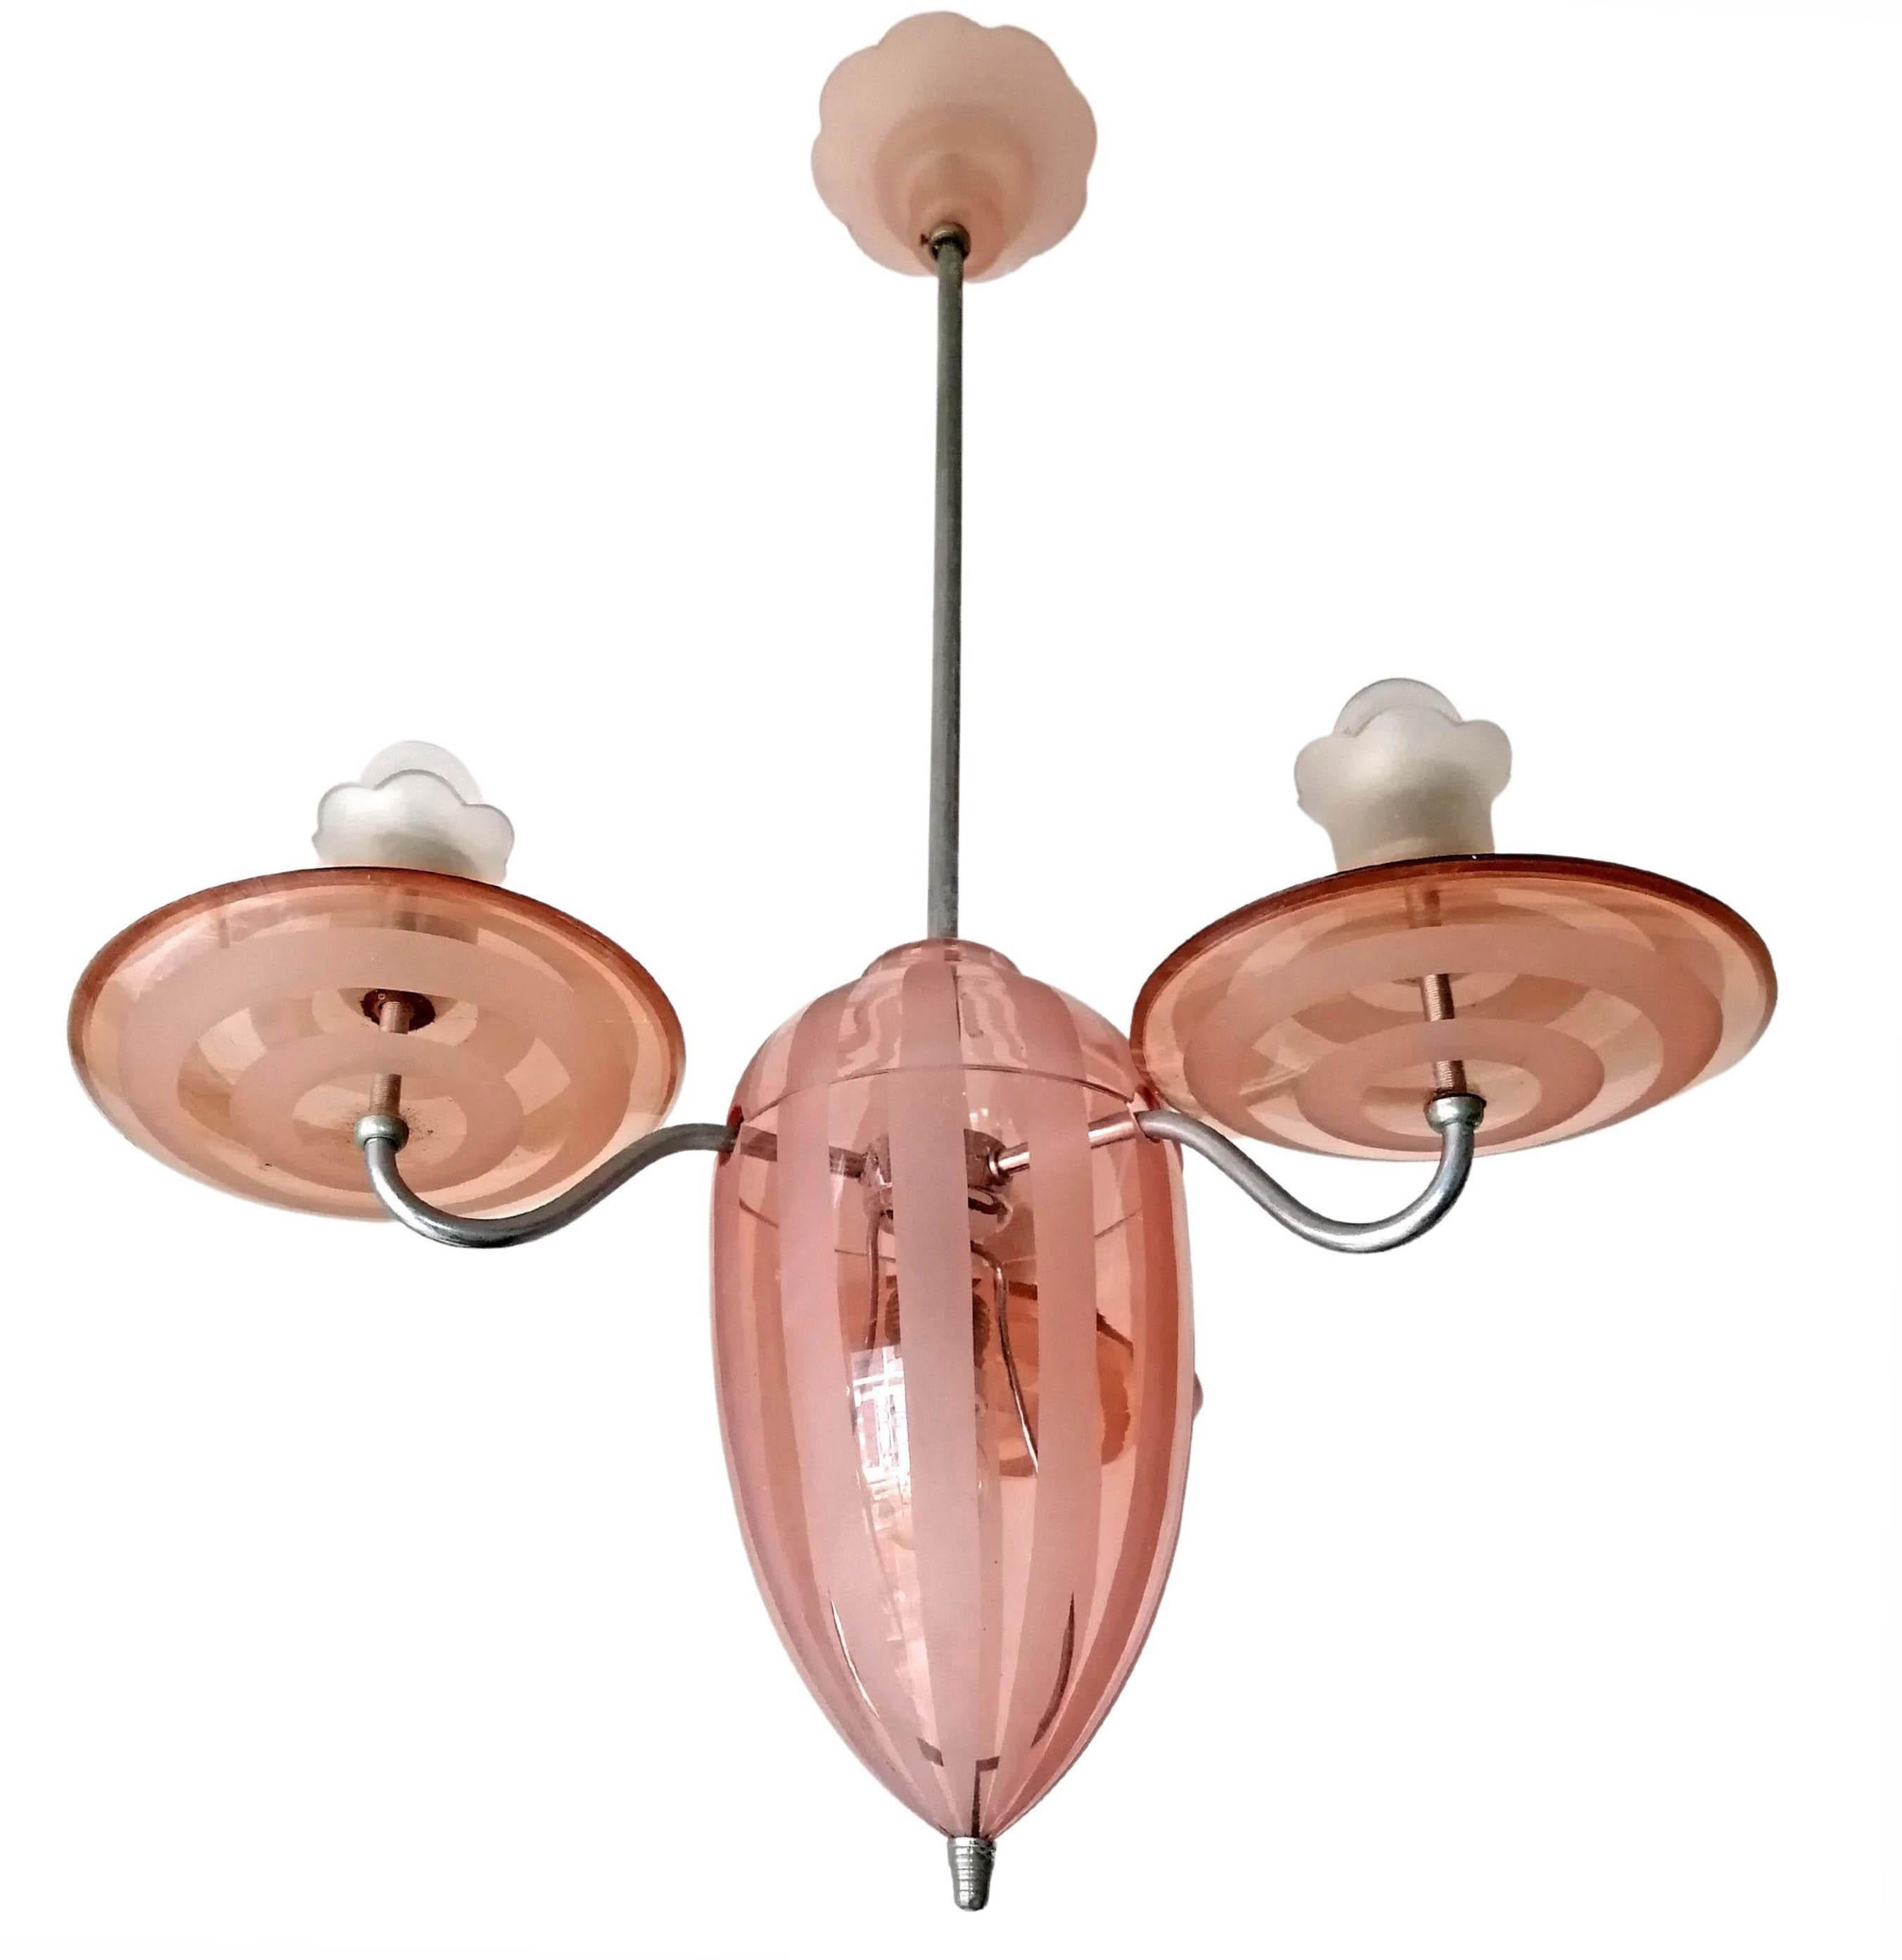 Art Nouveau French Art Deco Chandelier in Pink Etched Glass Stripes and Chrome Brass C1920 For Sale